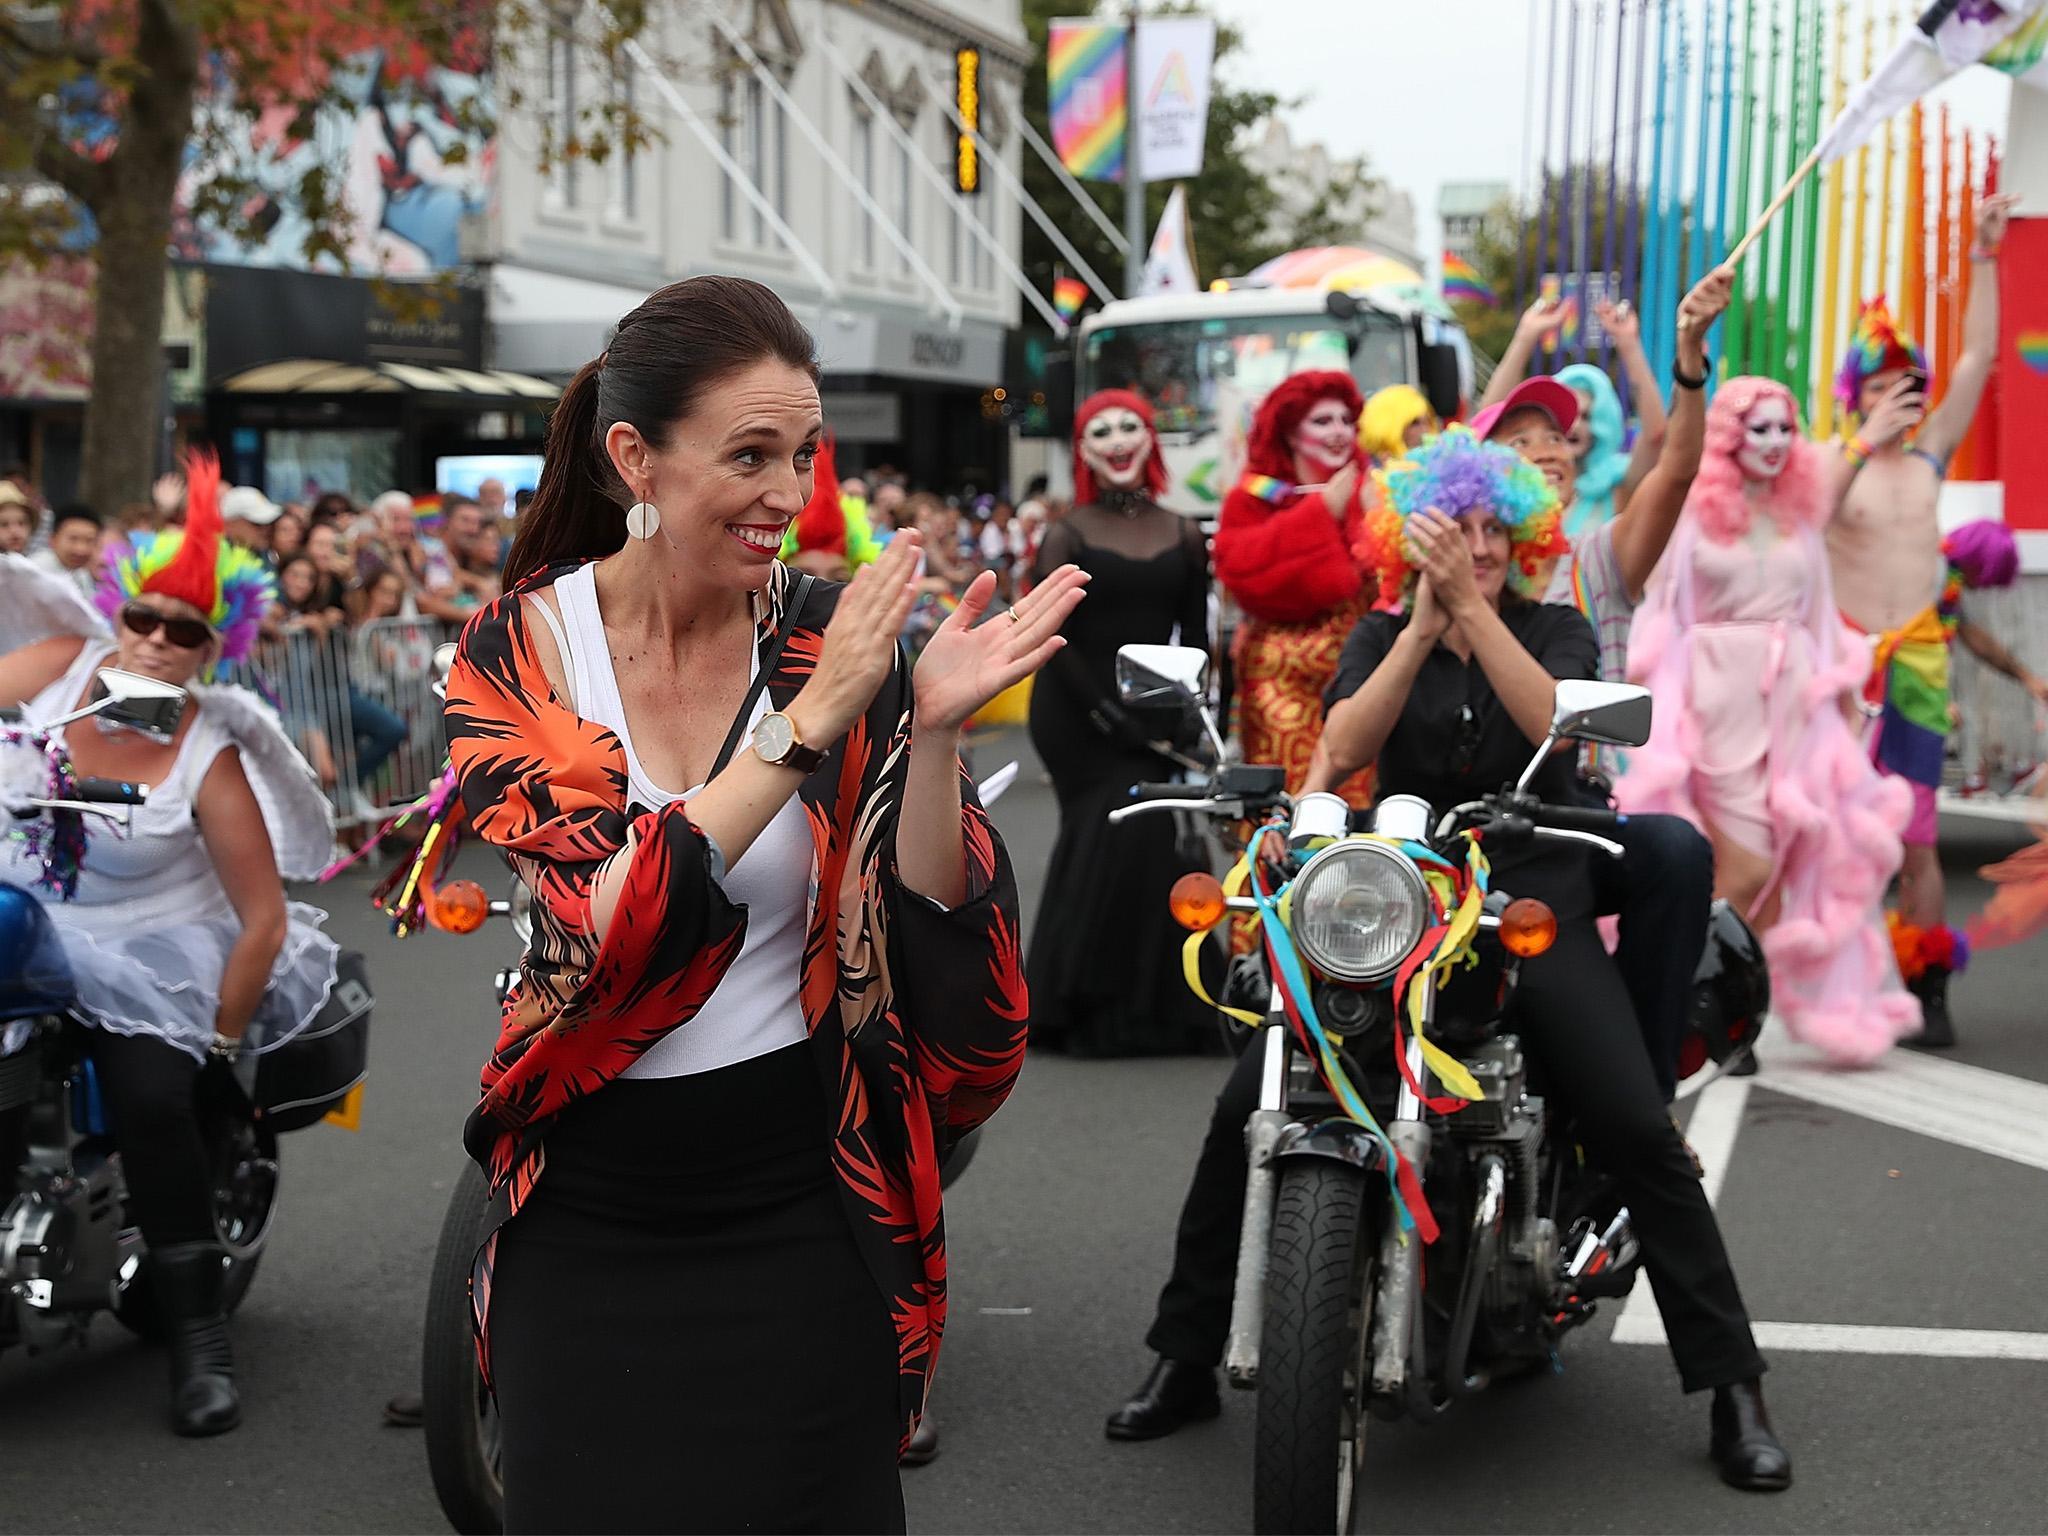 New Zealand prime minister first ever to march in gay pride